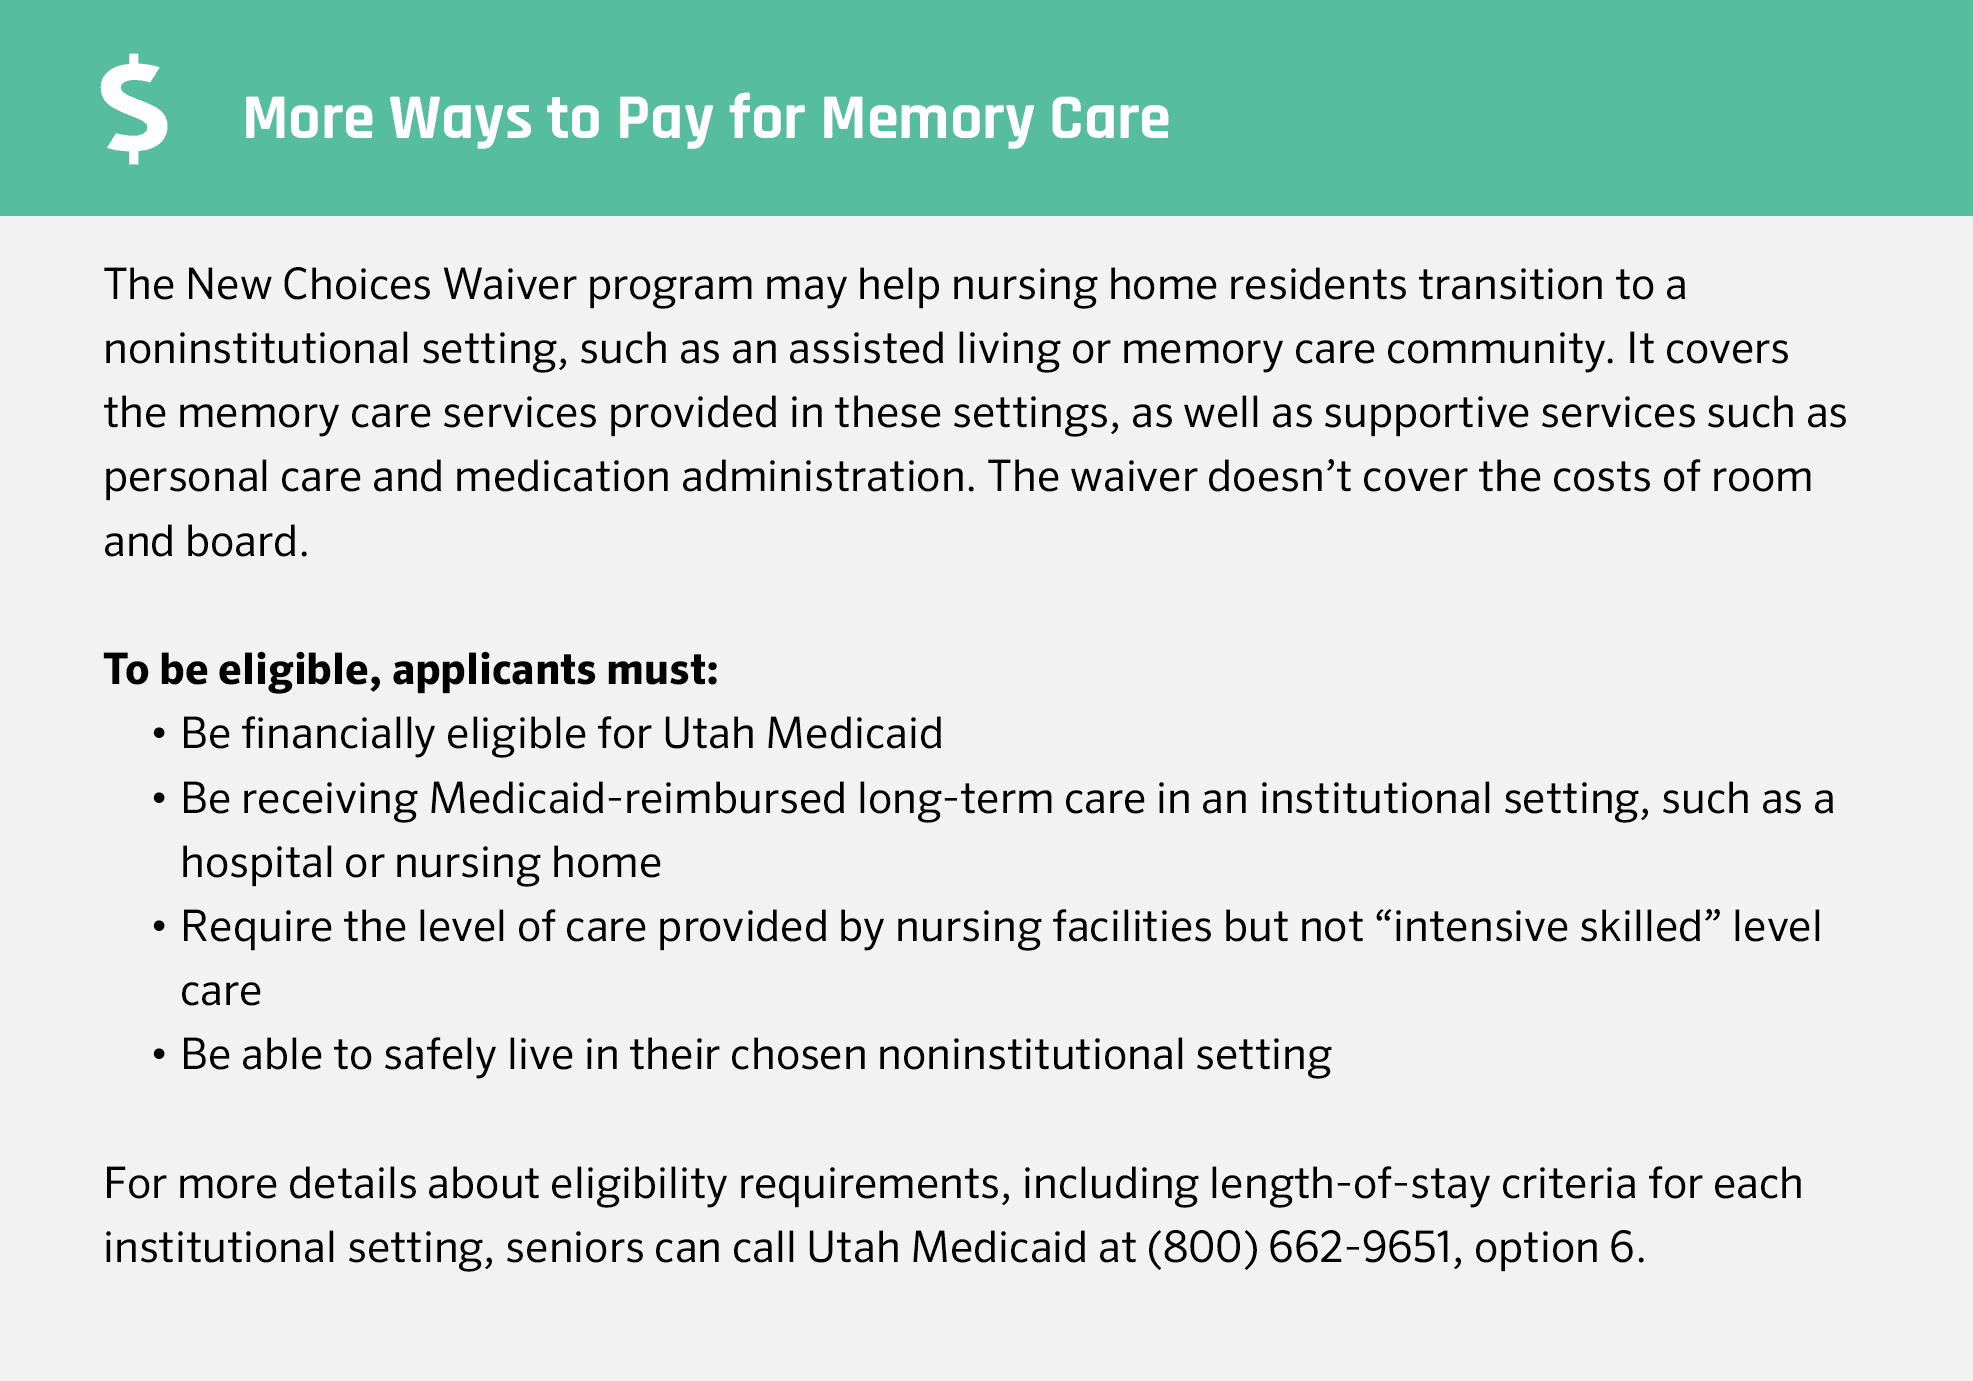 More ways to pay for memory care in Utah